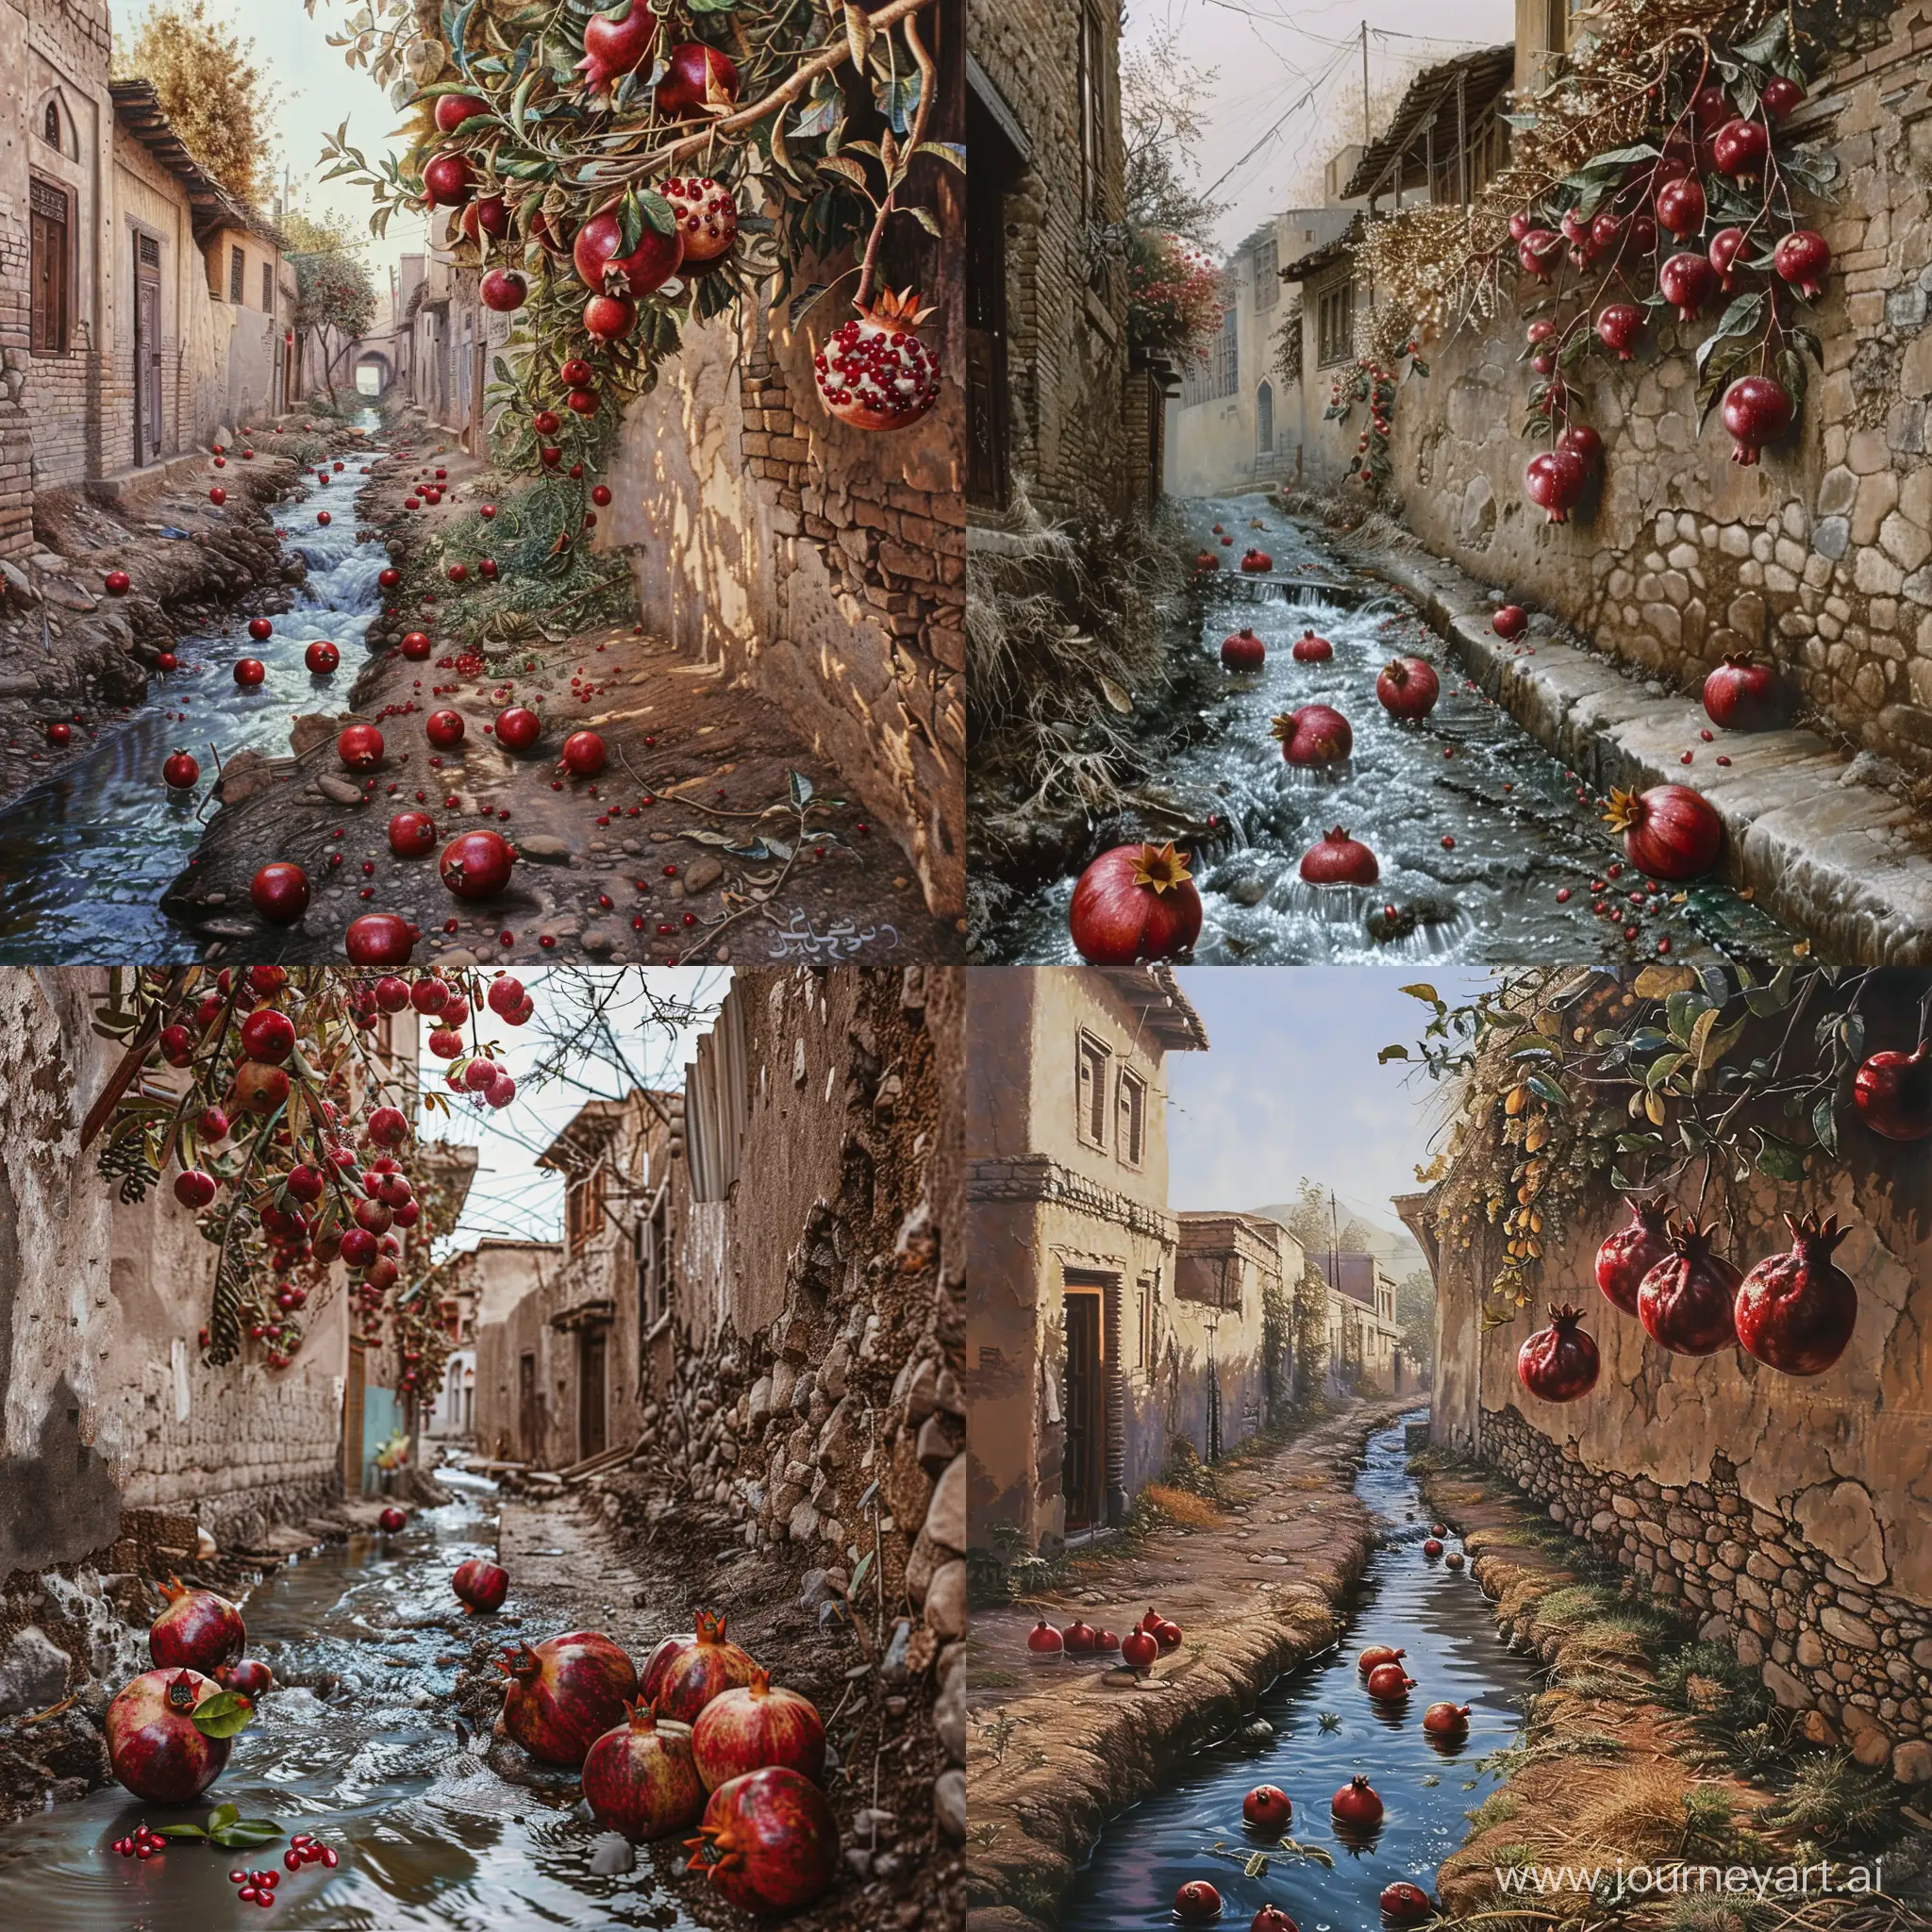 The picture shows a street in old Iranian villages with houses on both sides of the street and old walls. Pomegranate branches are hanging from the walls into the street. A small stream of water flows under the wall on the left side, with pomegranates and apples floating in the water. Highest quality and more details.